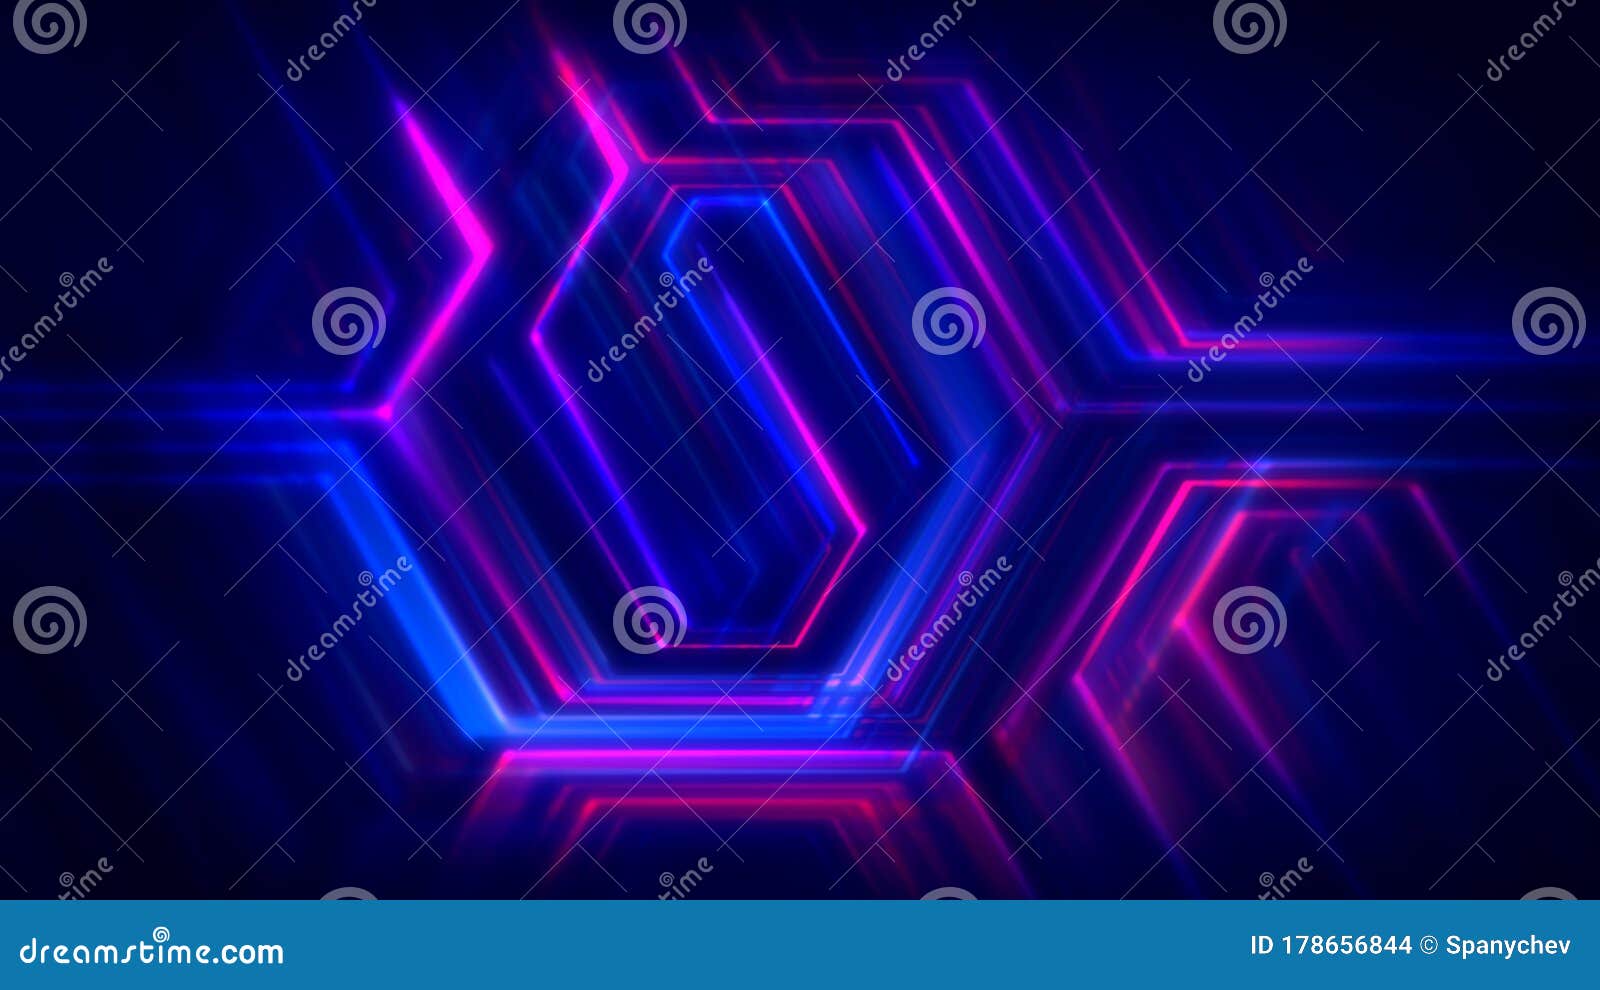 Abstract Cyberpunk Background Composition With Blue And Violet Neon